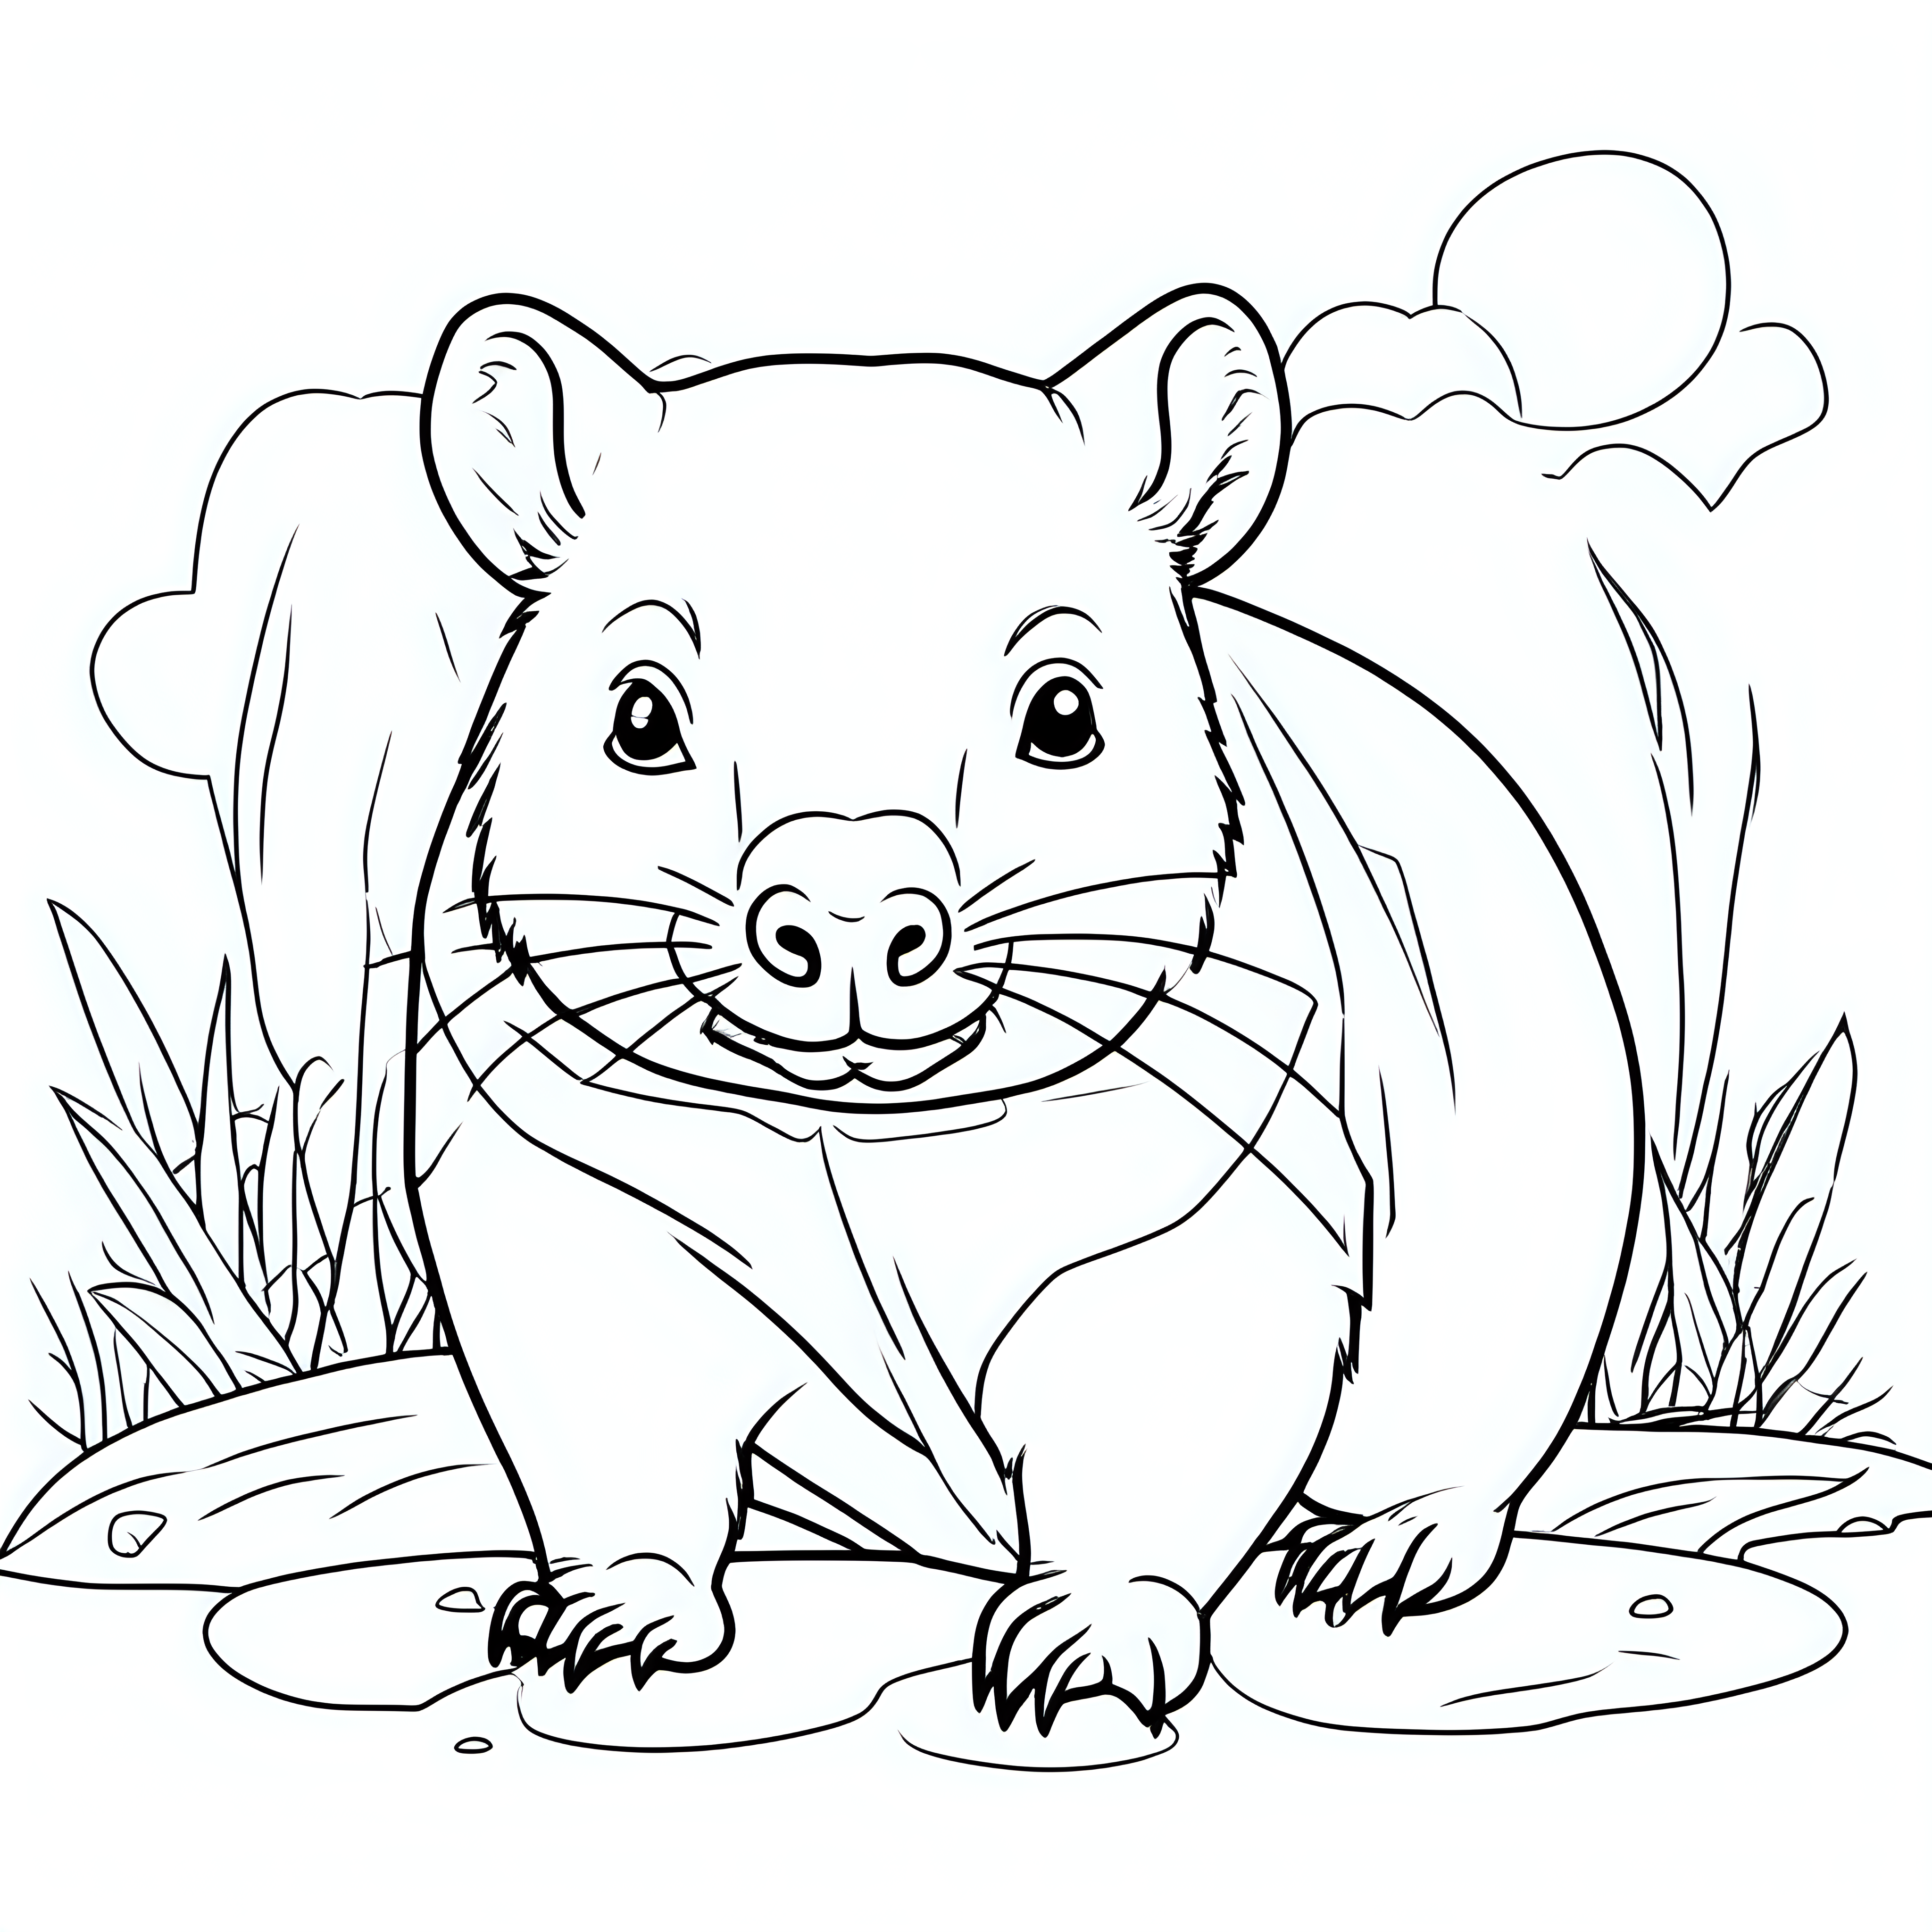 draw a cute Wombat animal with only the outline in black for a coloring book for kids